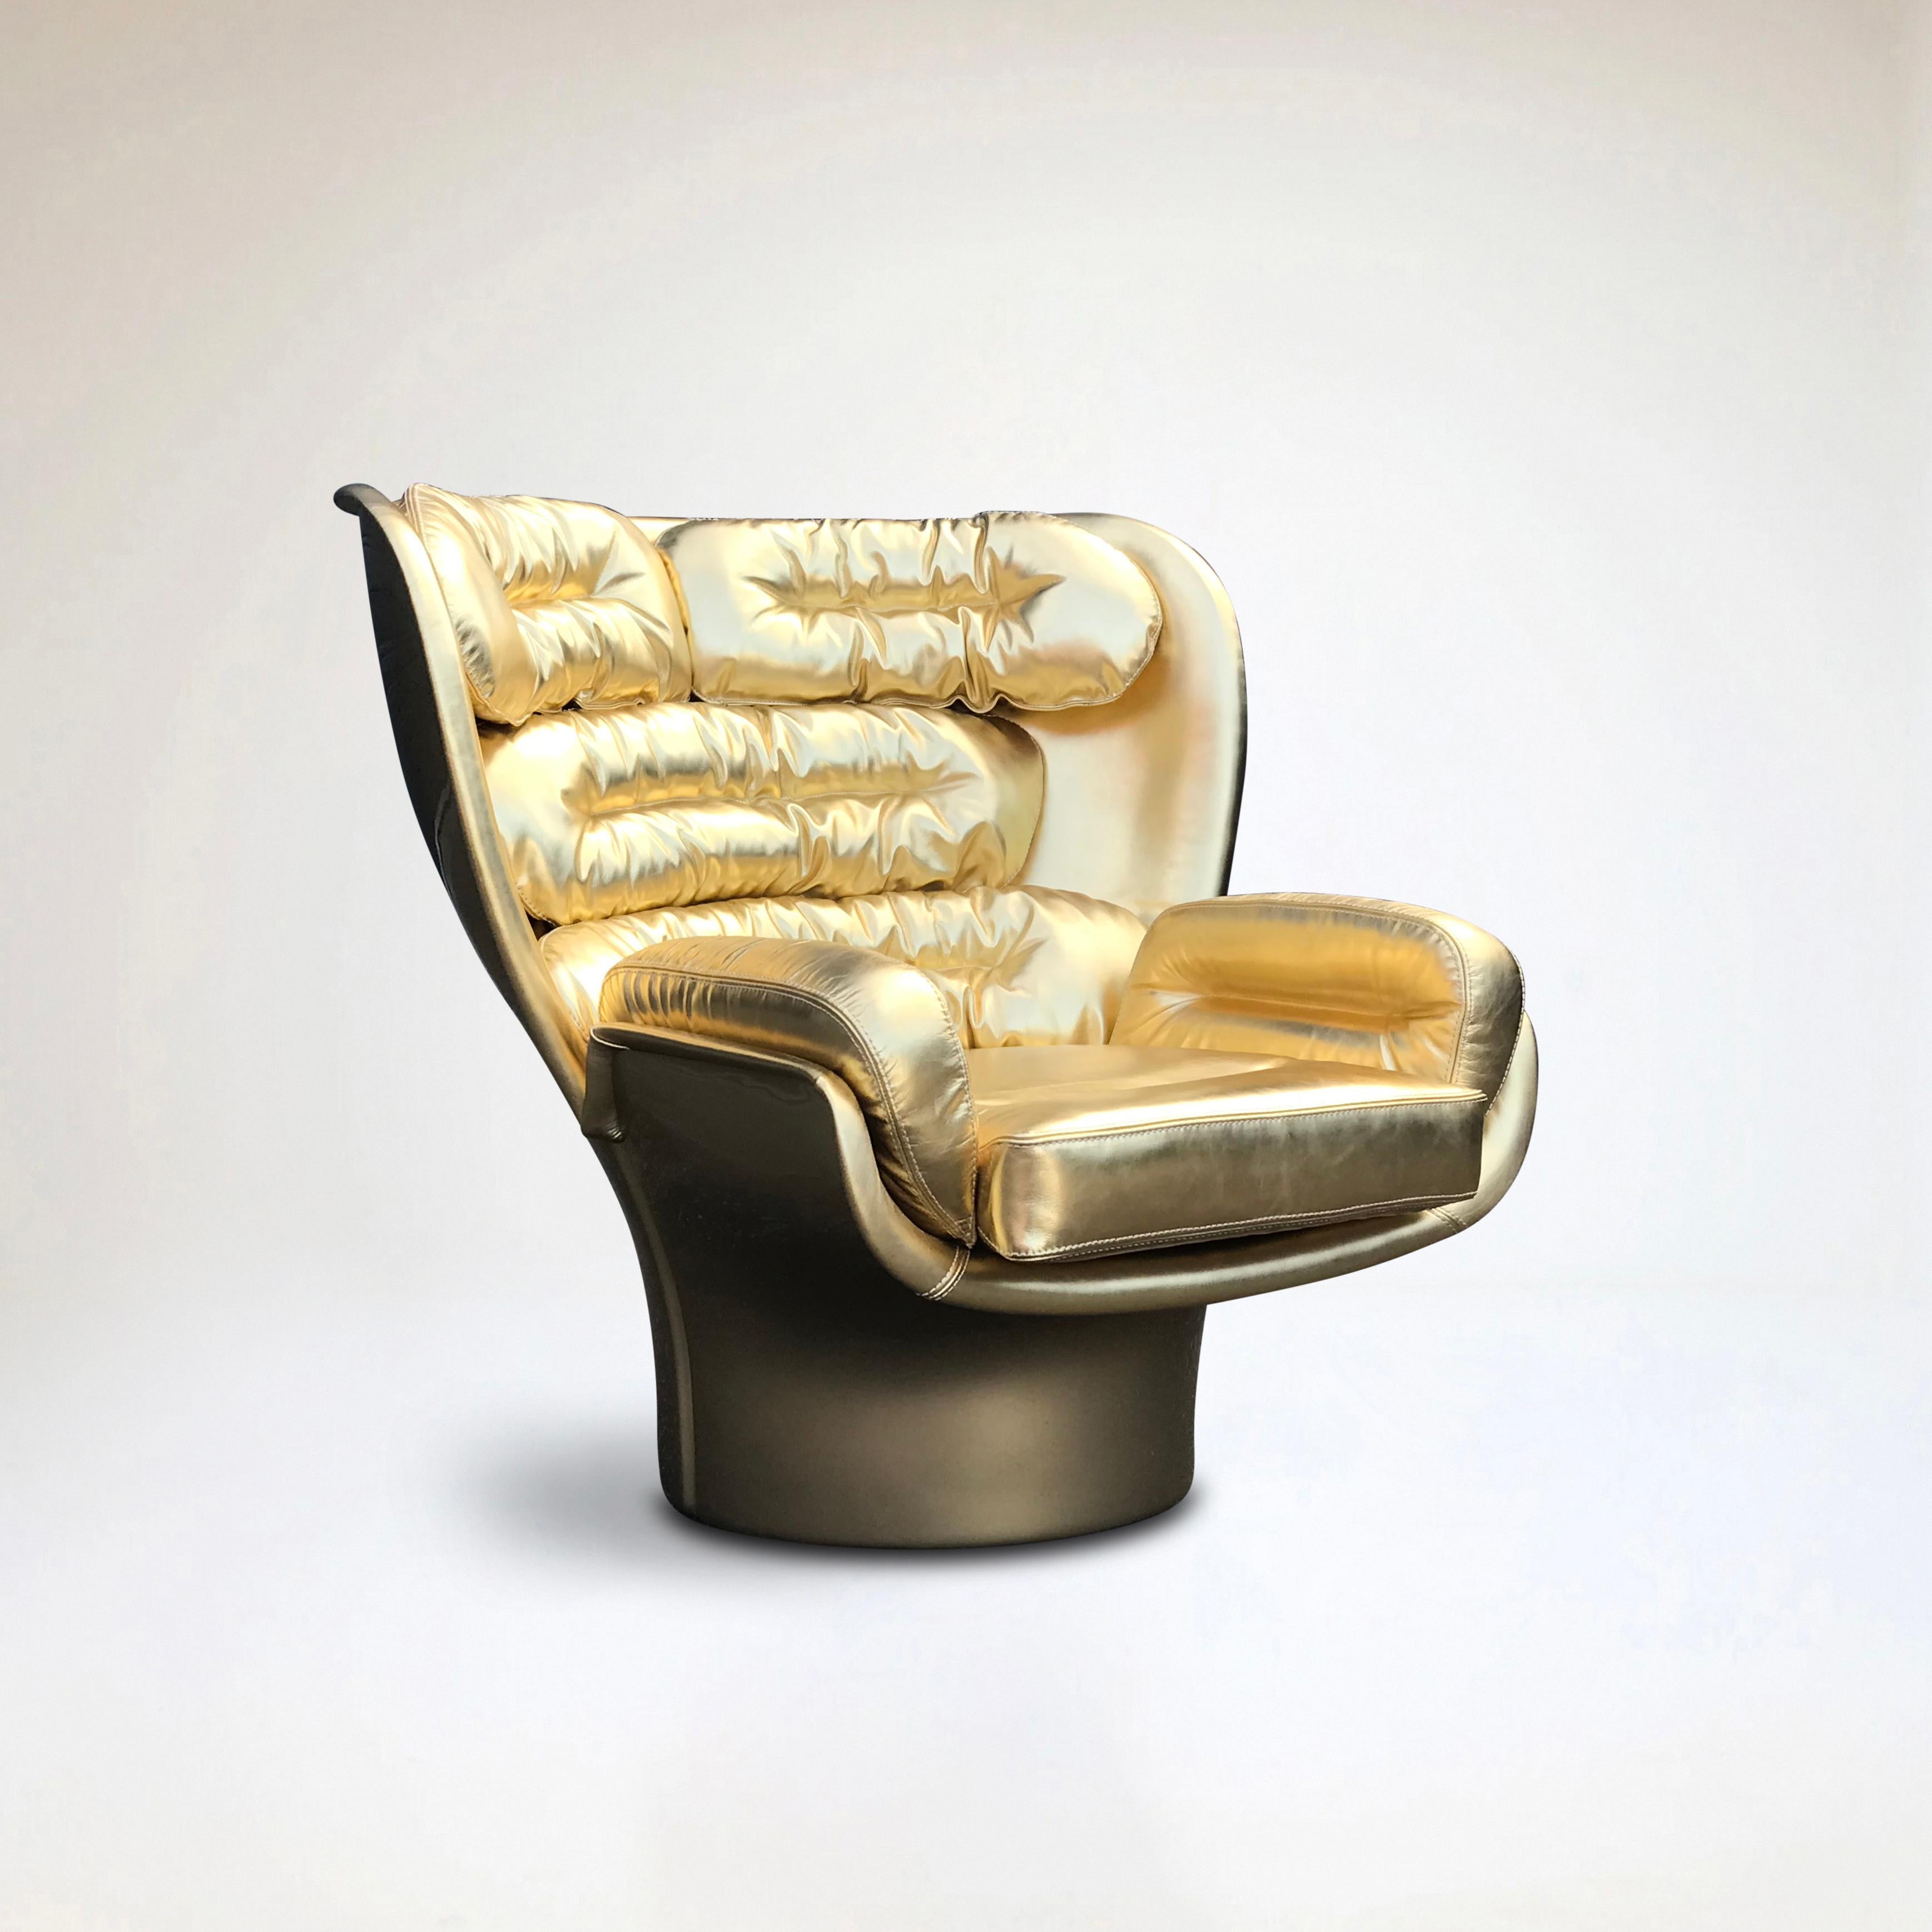 Golden Limited Edition Elda Chair by Joe Colombo for Longhi Italy no. 7/20 For Sale 1